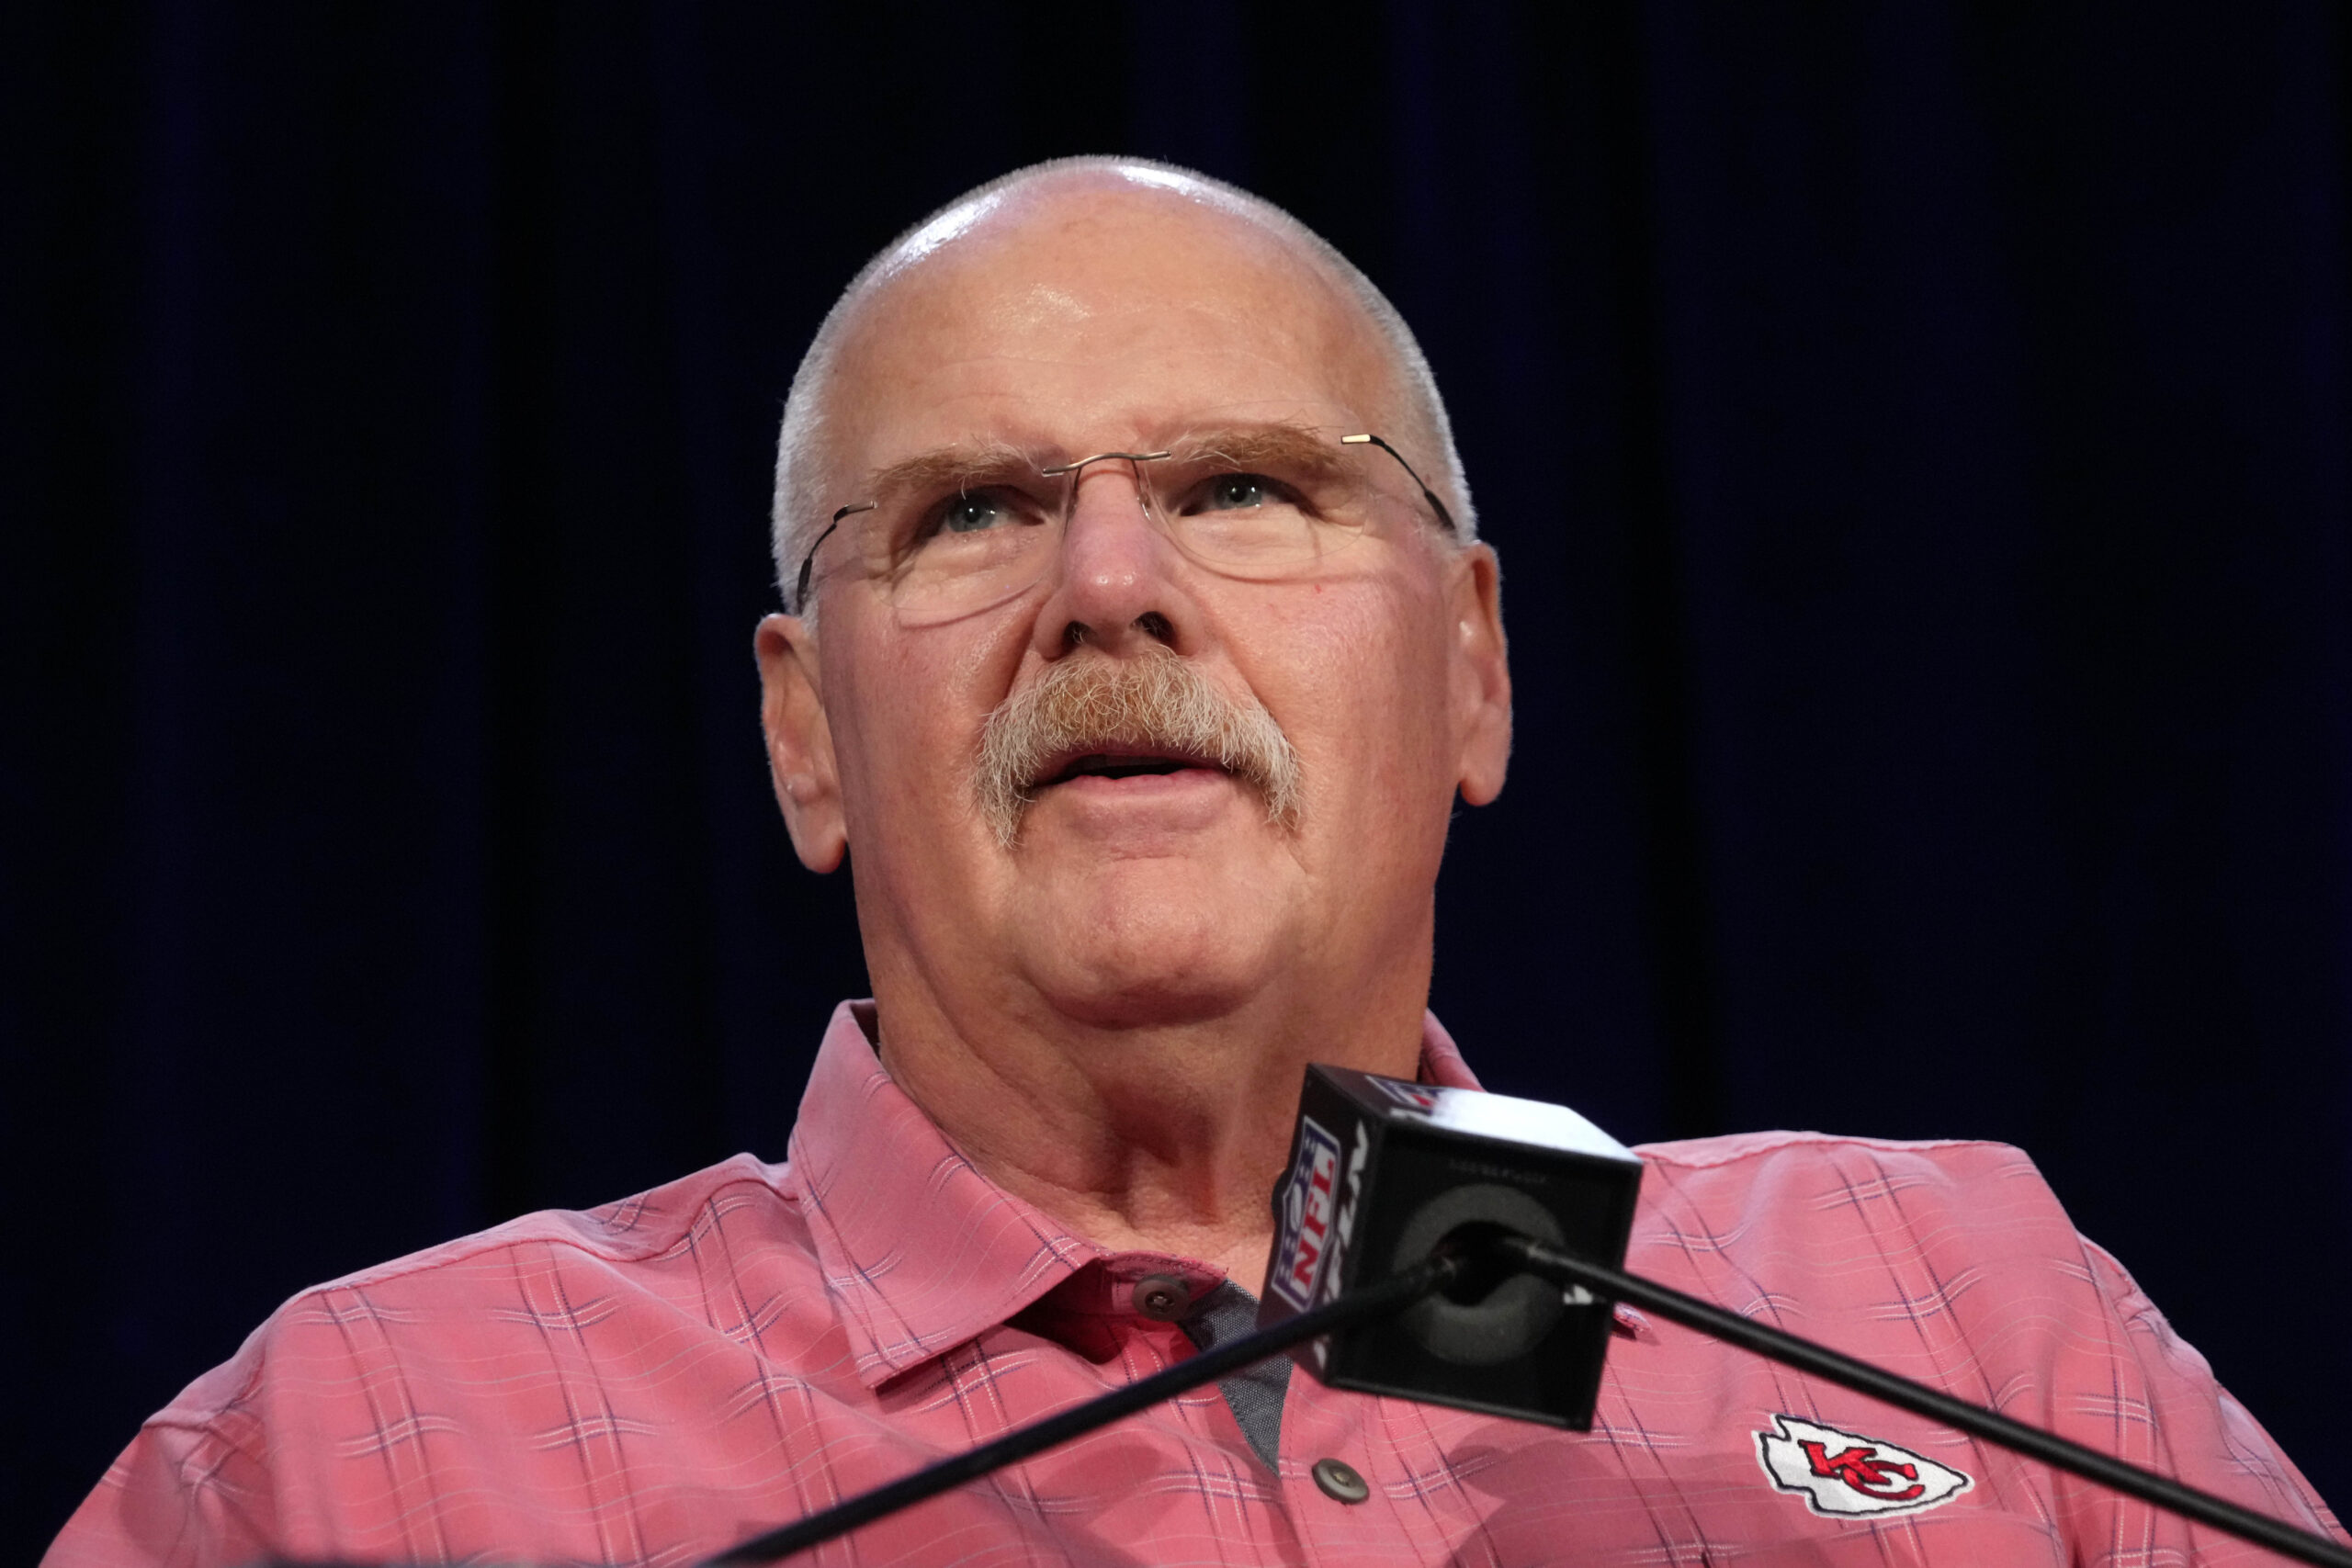 Kansas City Chiefs coach Andy Reid speaks during the Super Bowl 57 Winning Team Head Coach and MVP press conference at the Phoenix Convention Center.